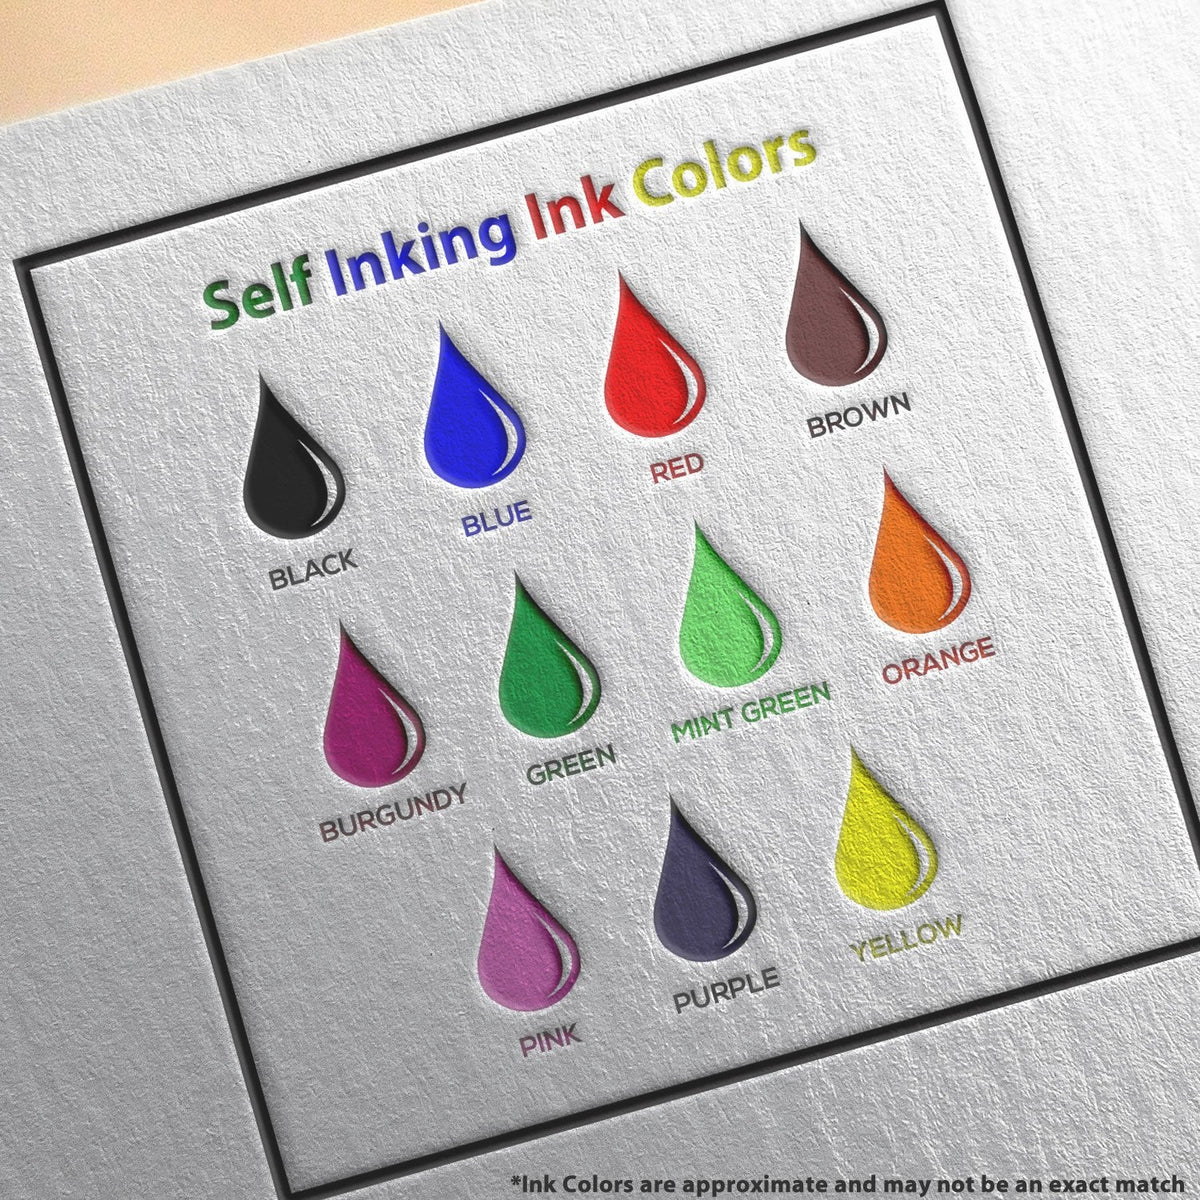 Self-Inking Medical Personnel Only Stamp Ink Color Options